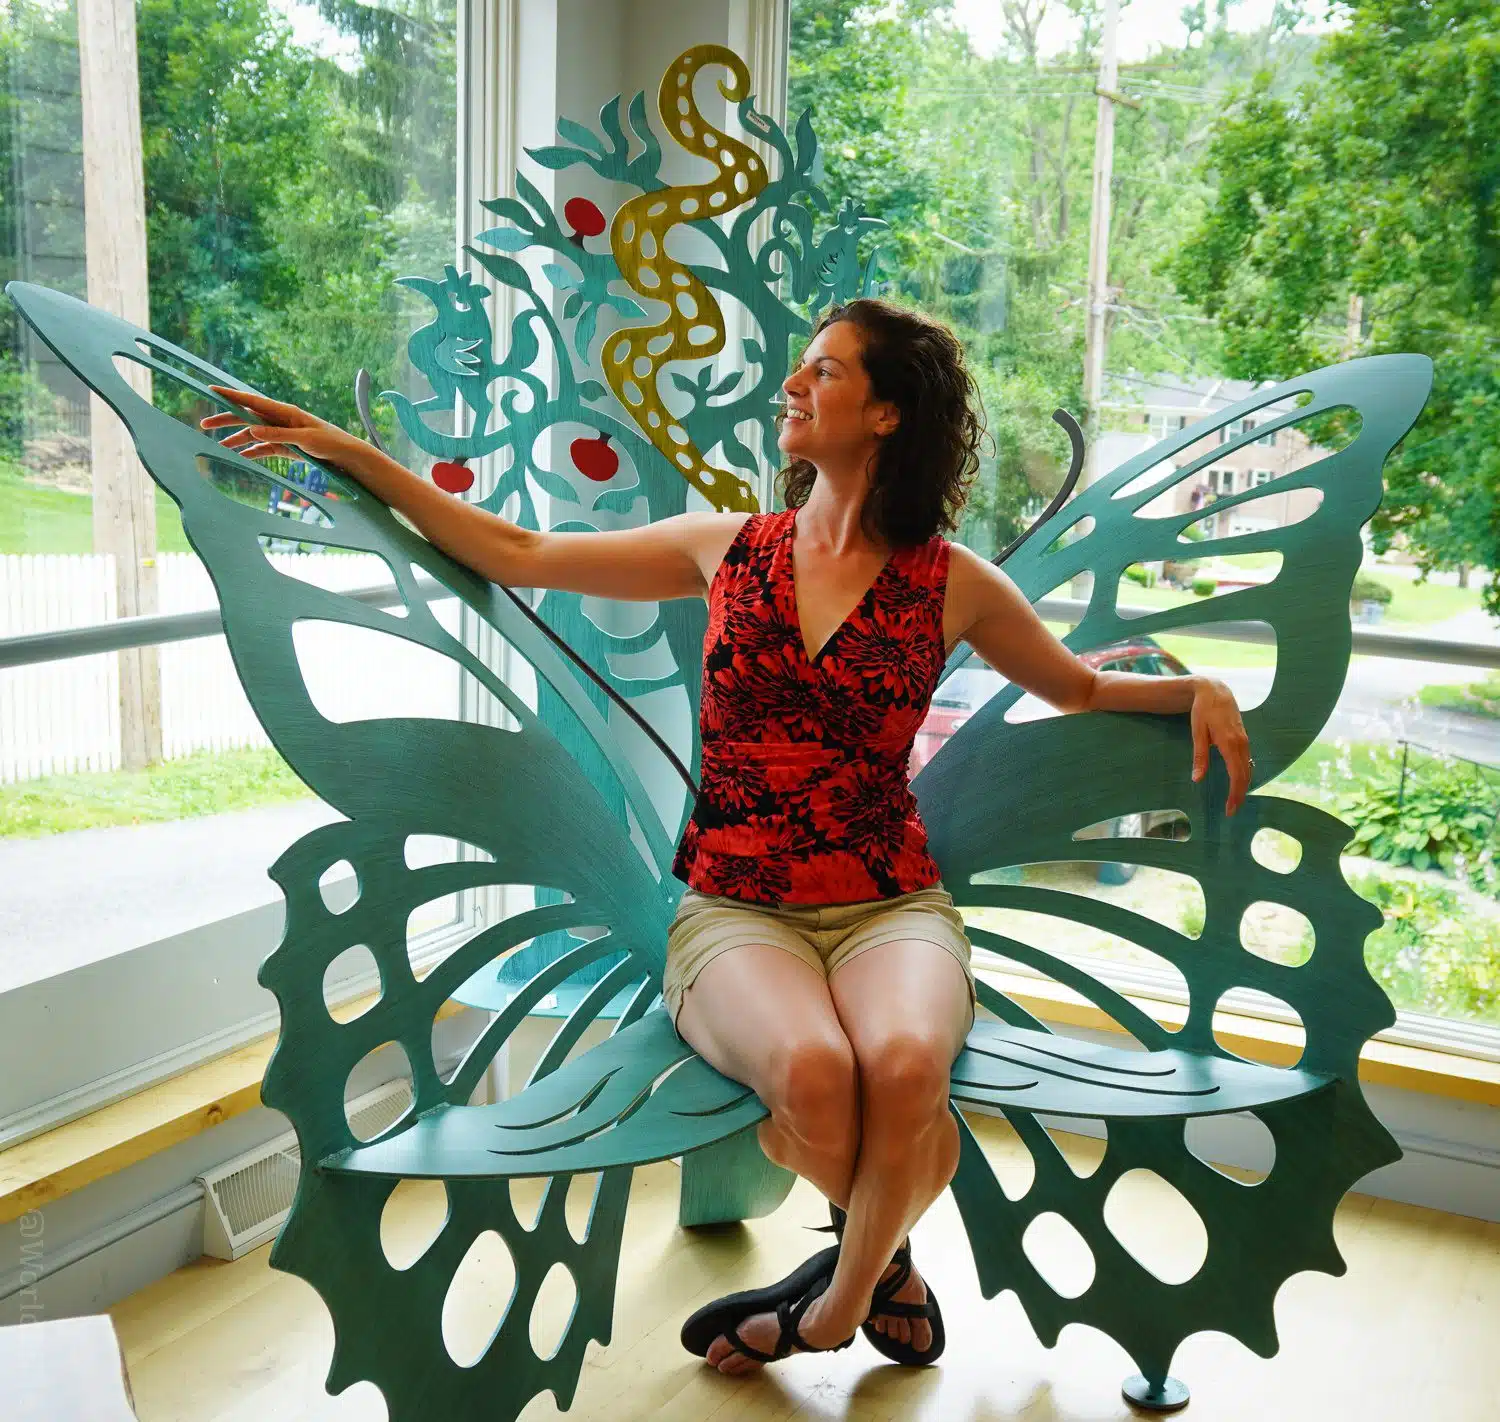 Metal butterfly chair!